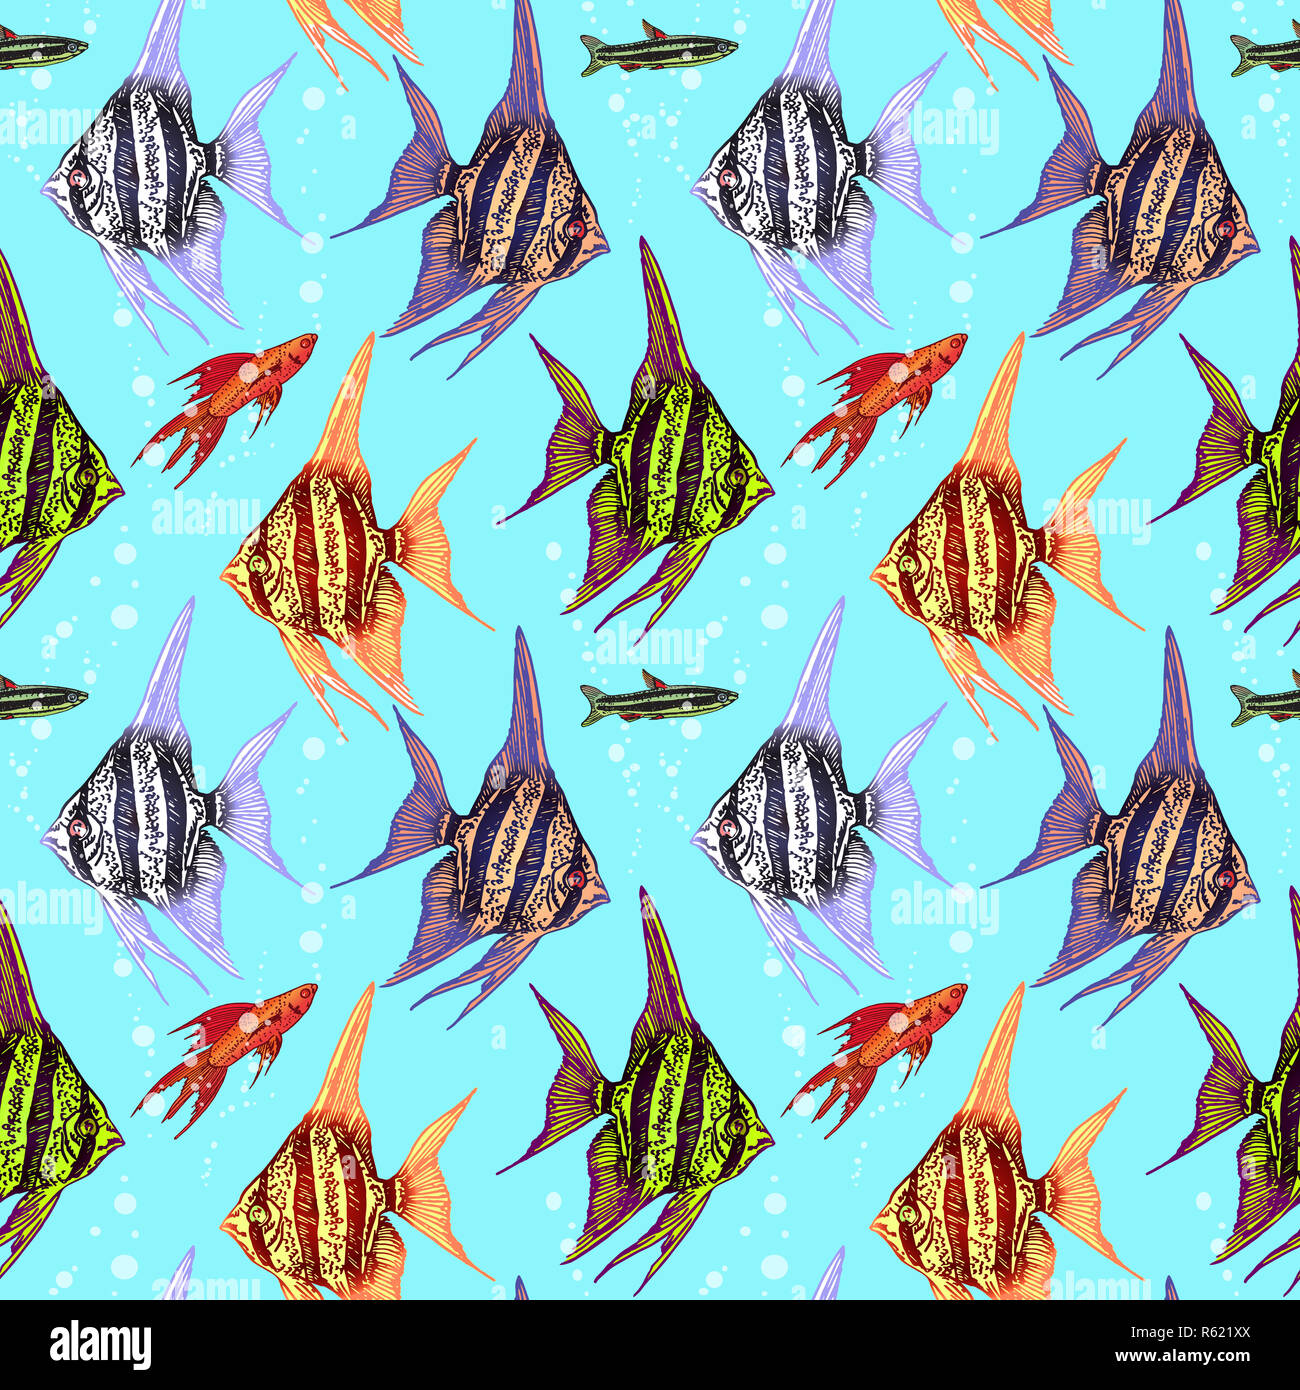 Angelfishes, Fancy Hi-fin Swordtail and Dwarf pencilfish, seamless pattern design, hand drawn doodle, sketch in pop art style, color illustration Stock Photo